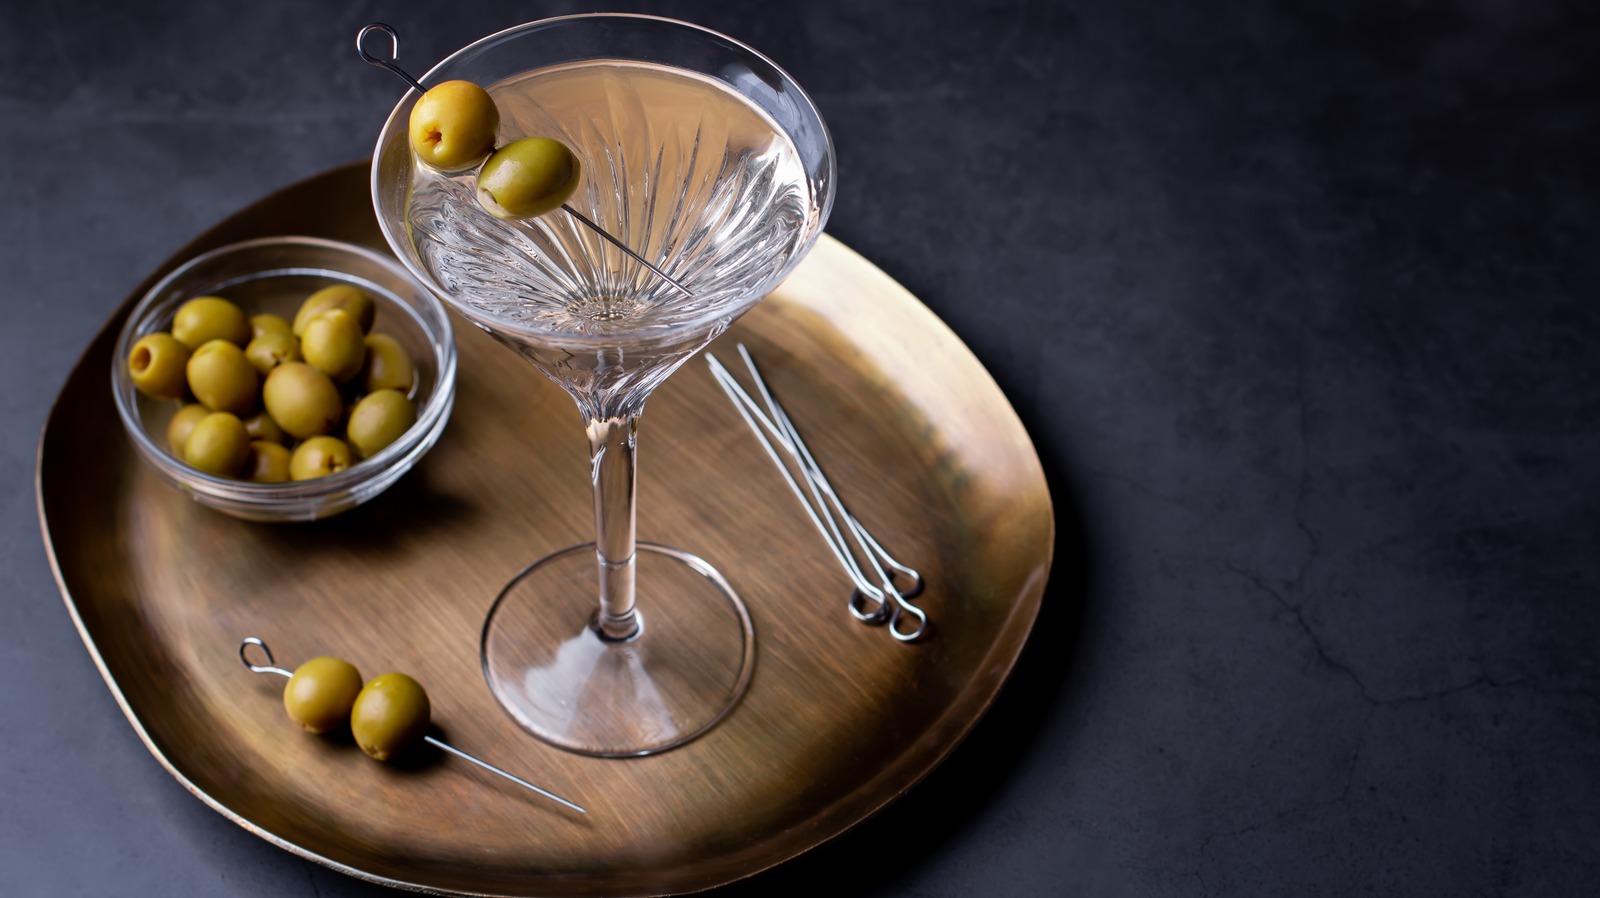 Does The Type Of Glass You Serve A Martini In Matter?